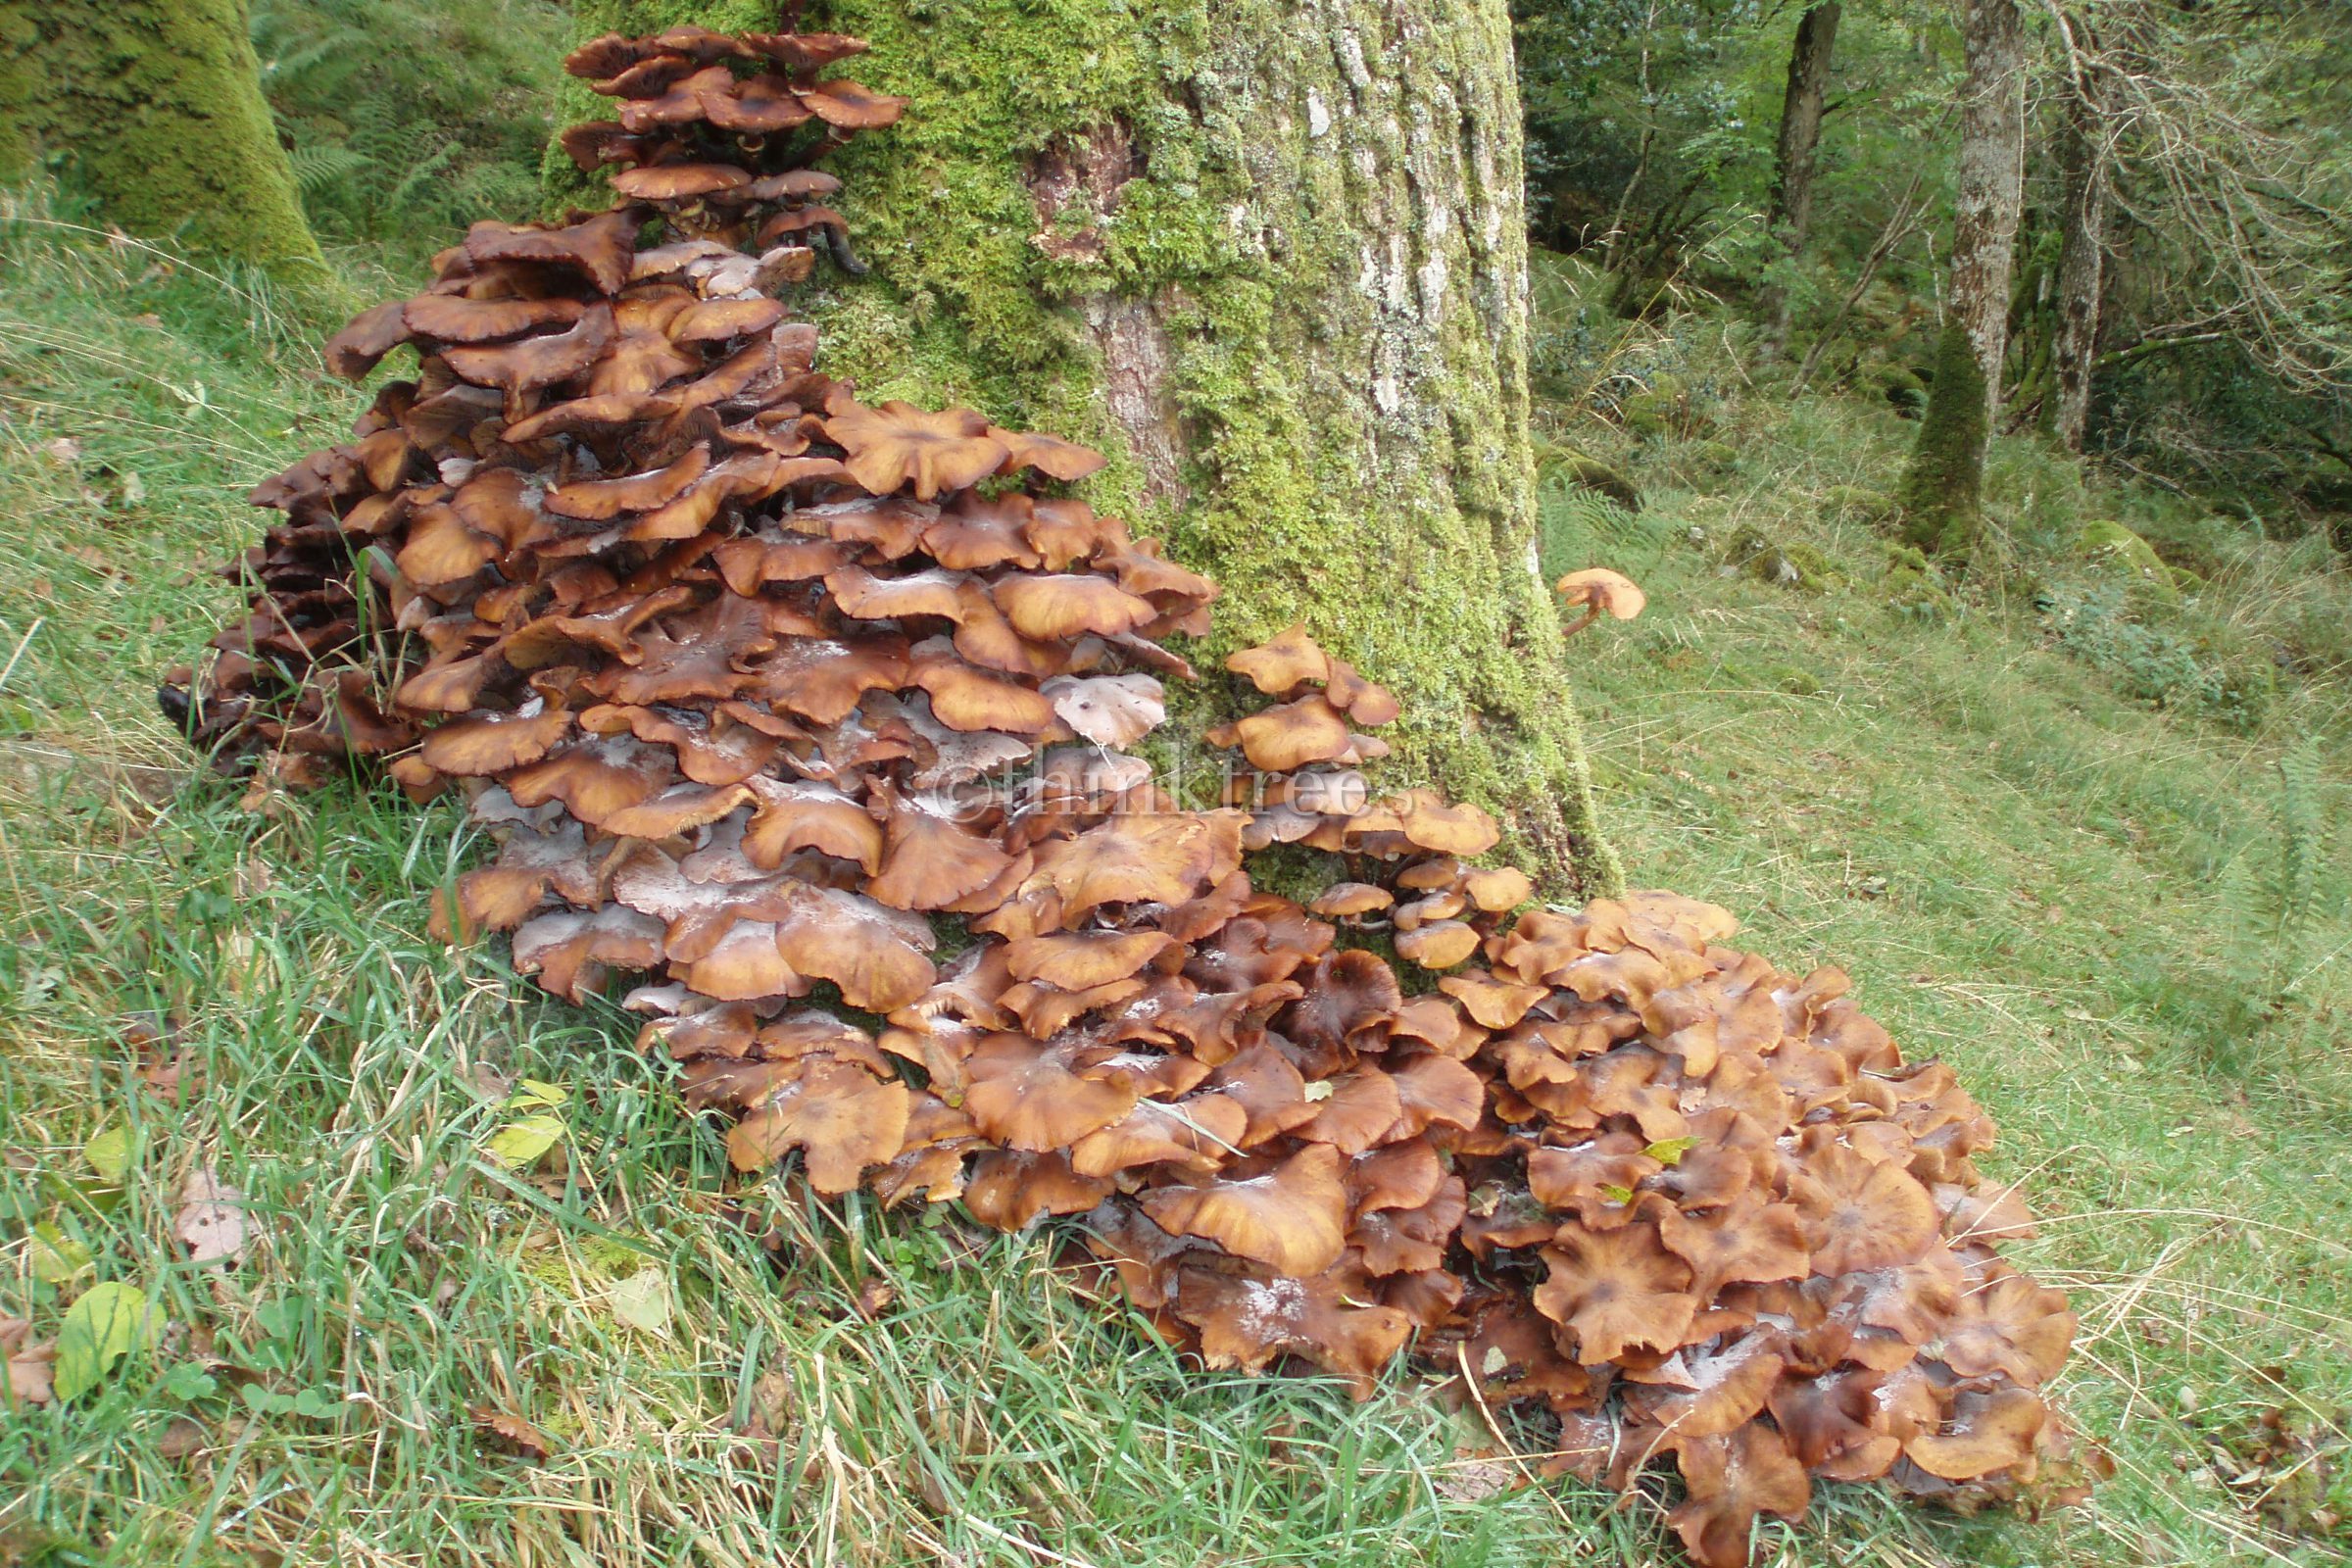 Fruiting bodies of Honey fungus (Amillararia sp.) around the base of a tree